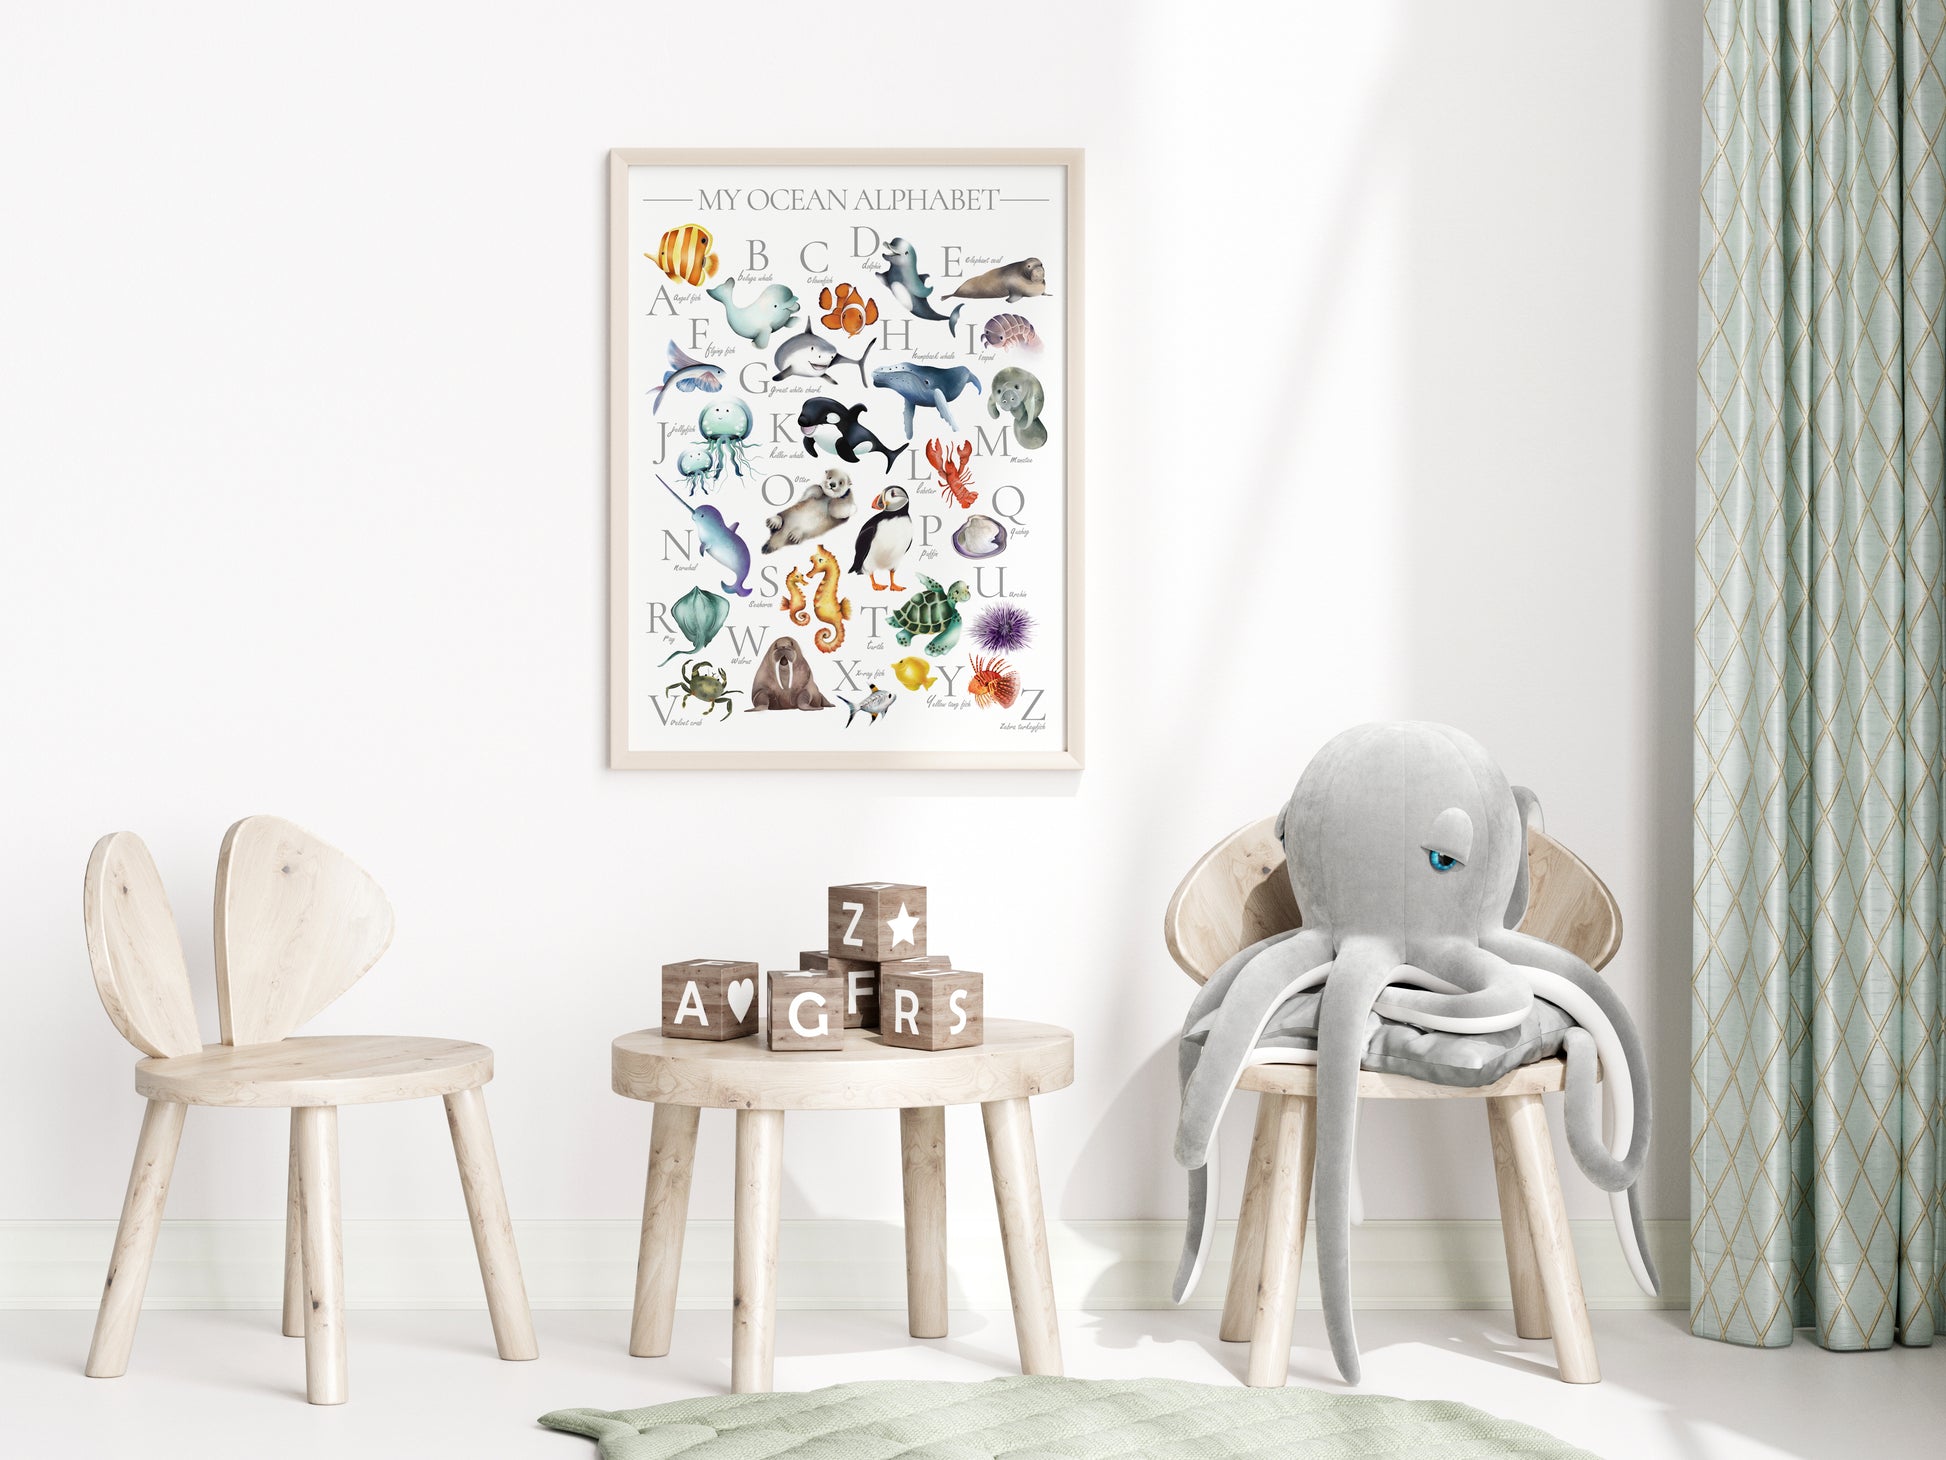 Colorful ocean animal alphabet print for kids with underwater animals from A thru Z framed in a light wood frame hanging on a wall in a kids bedroom- Studio Q - Art by Nicky Quartermaine Scott